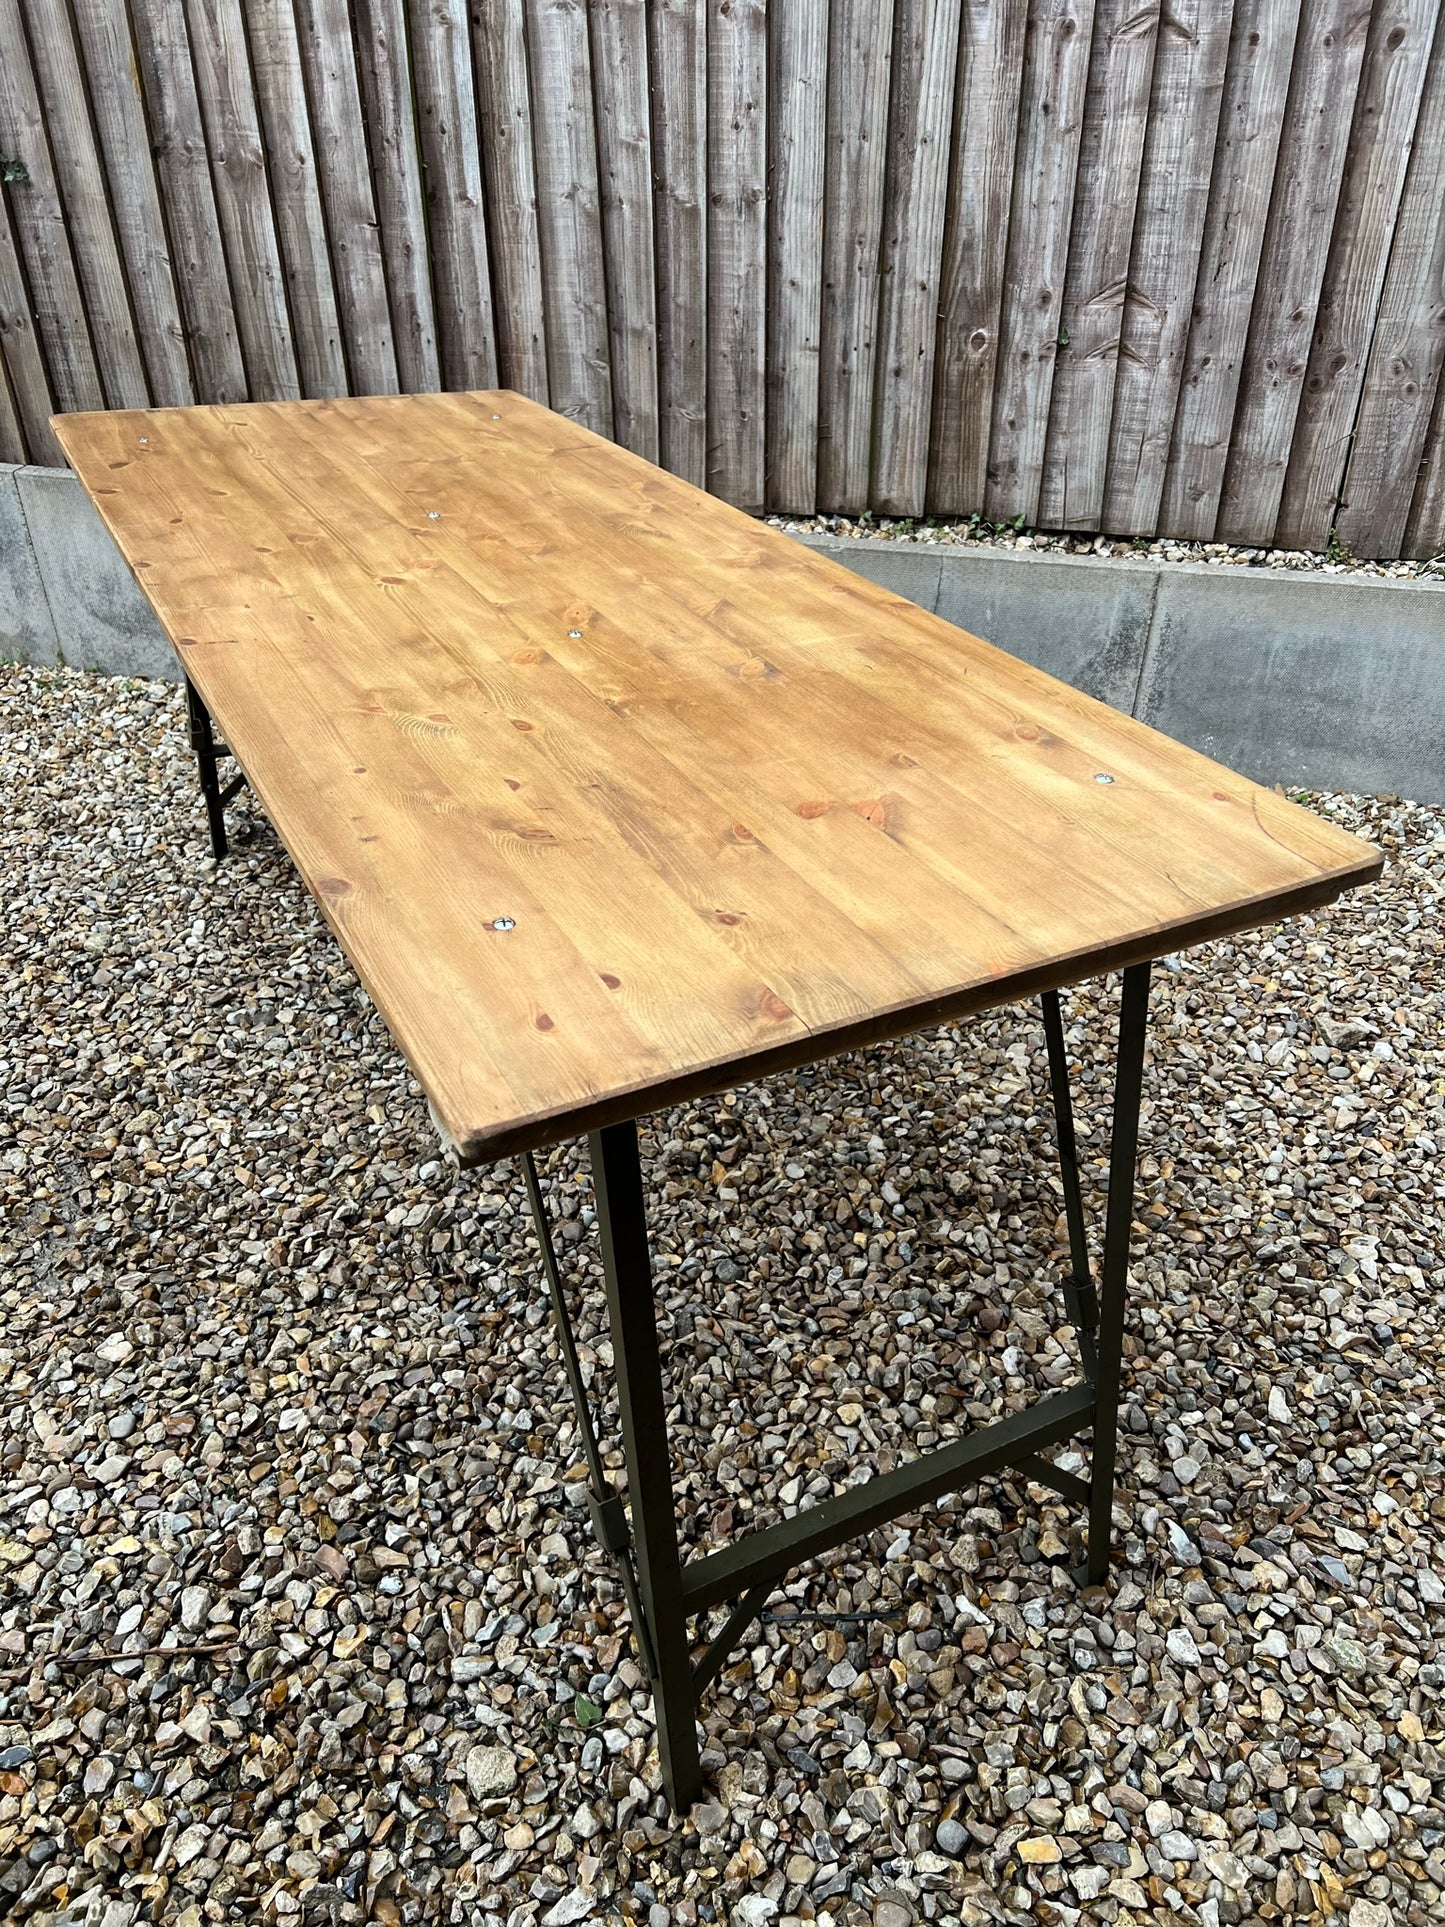 Rustic Industrial Trestle Table Wooden Folding Table VGC Reclaimed Farmhouse Dining Ex Army Office Desk